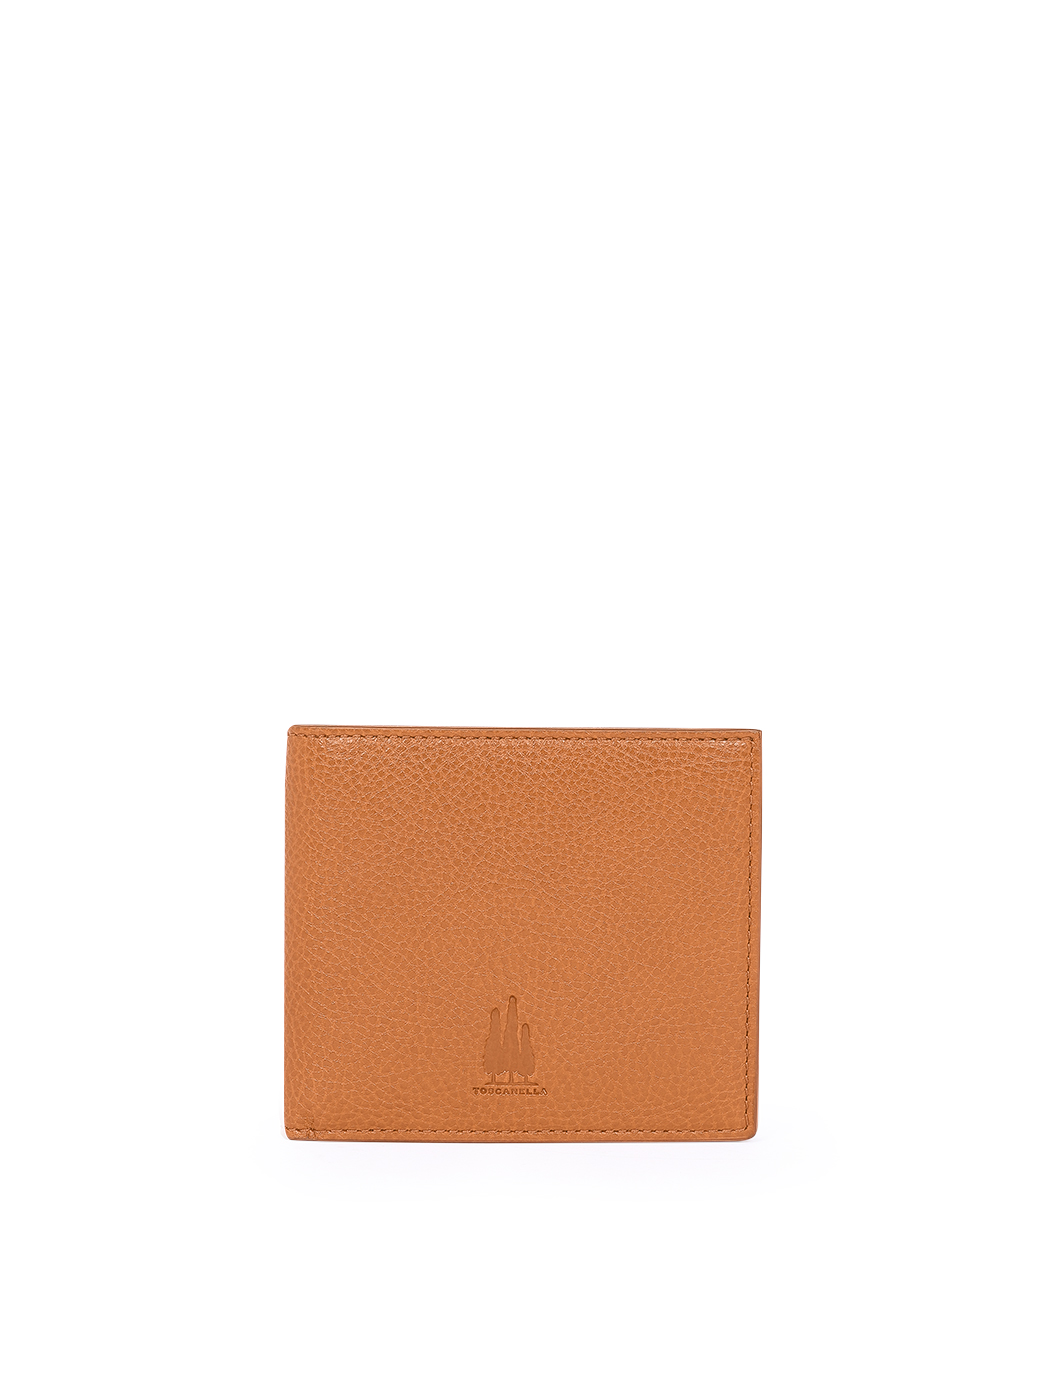 Billfold Wallet in Leather  Tobacco